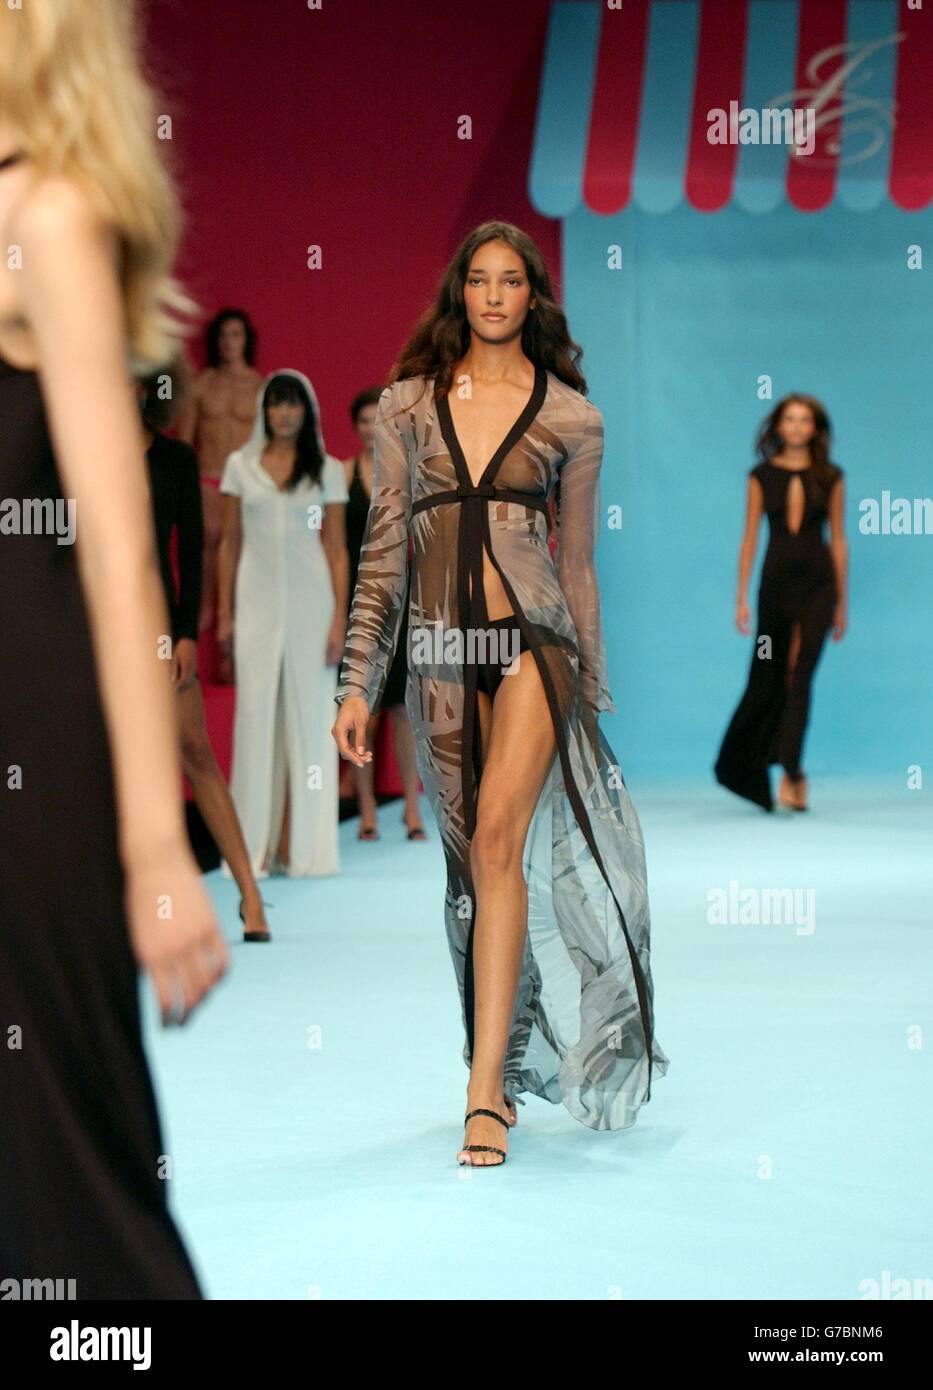 Fashion Catwalk Lfw2004 Model See Through Gown Nipple Showing High Resolution Stock Photography and Alamy